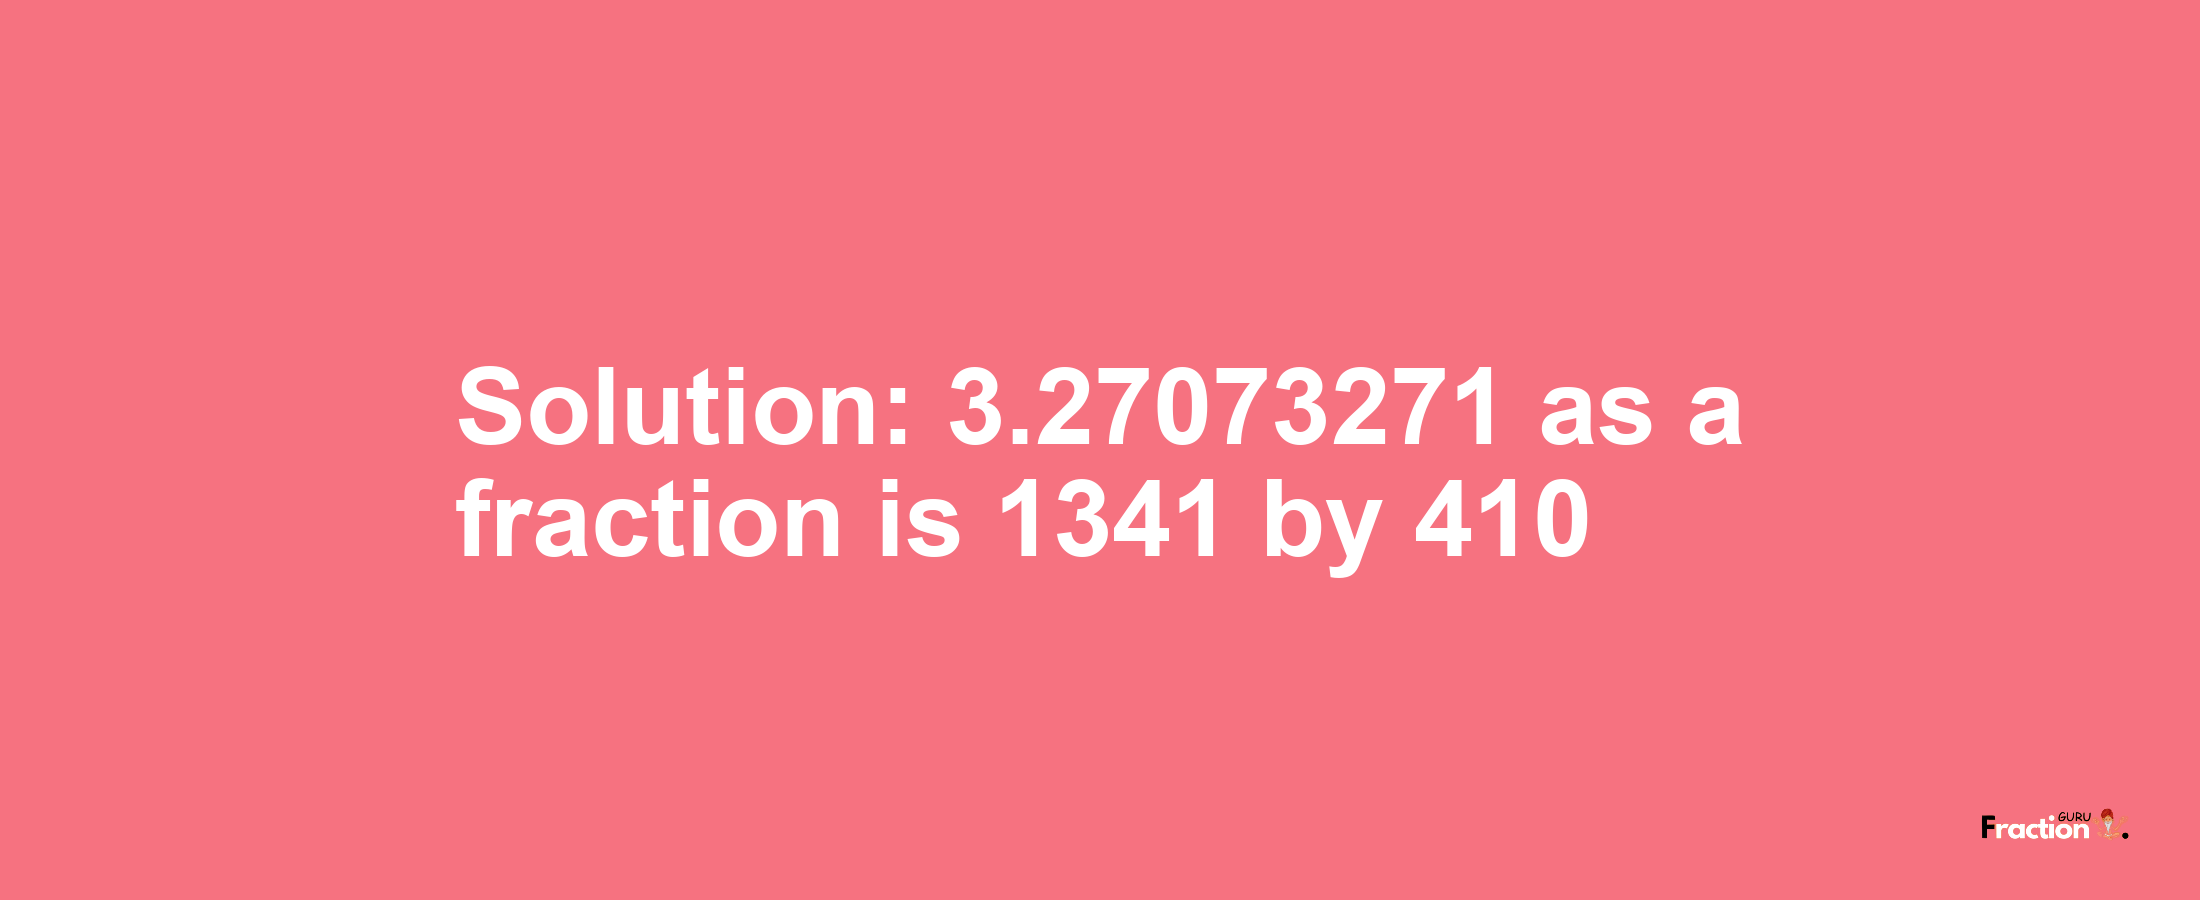 Solution:3.27073271 as a fraction is 1341/410